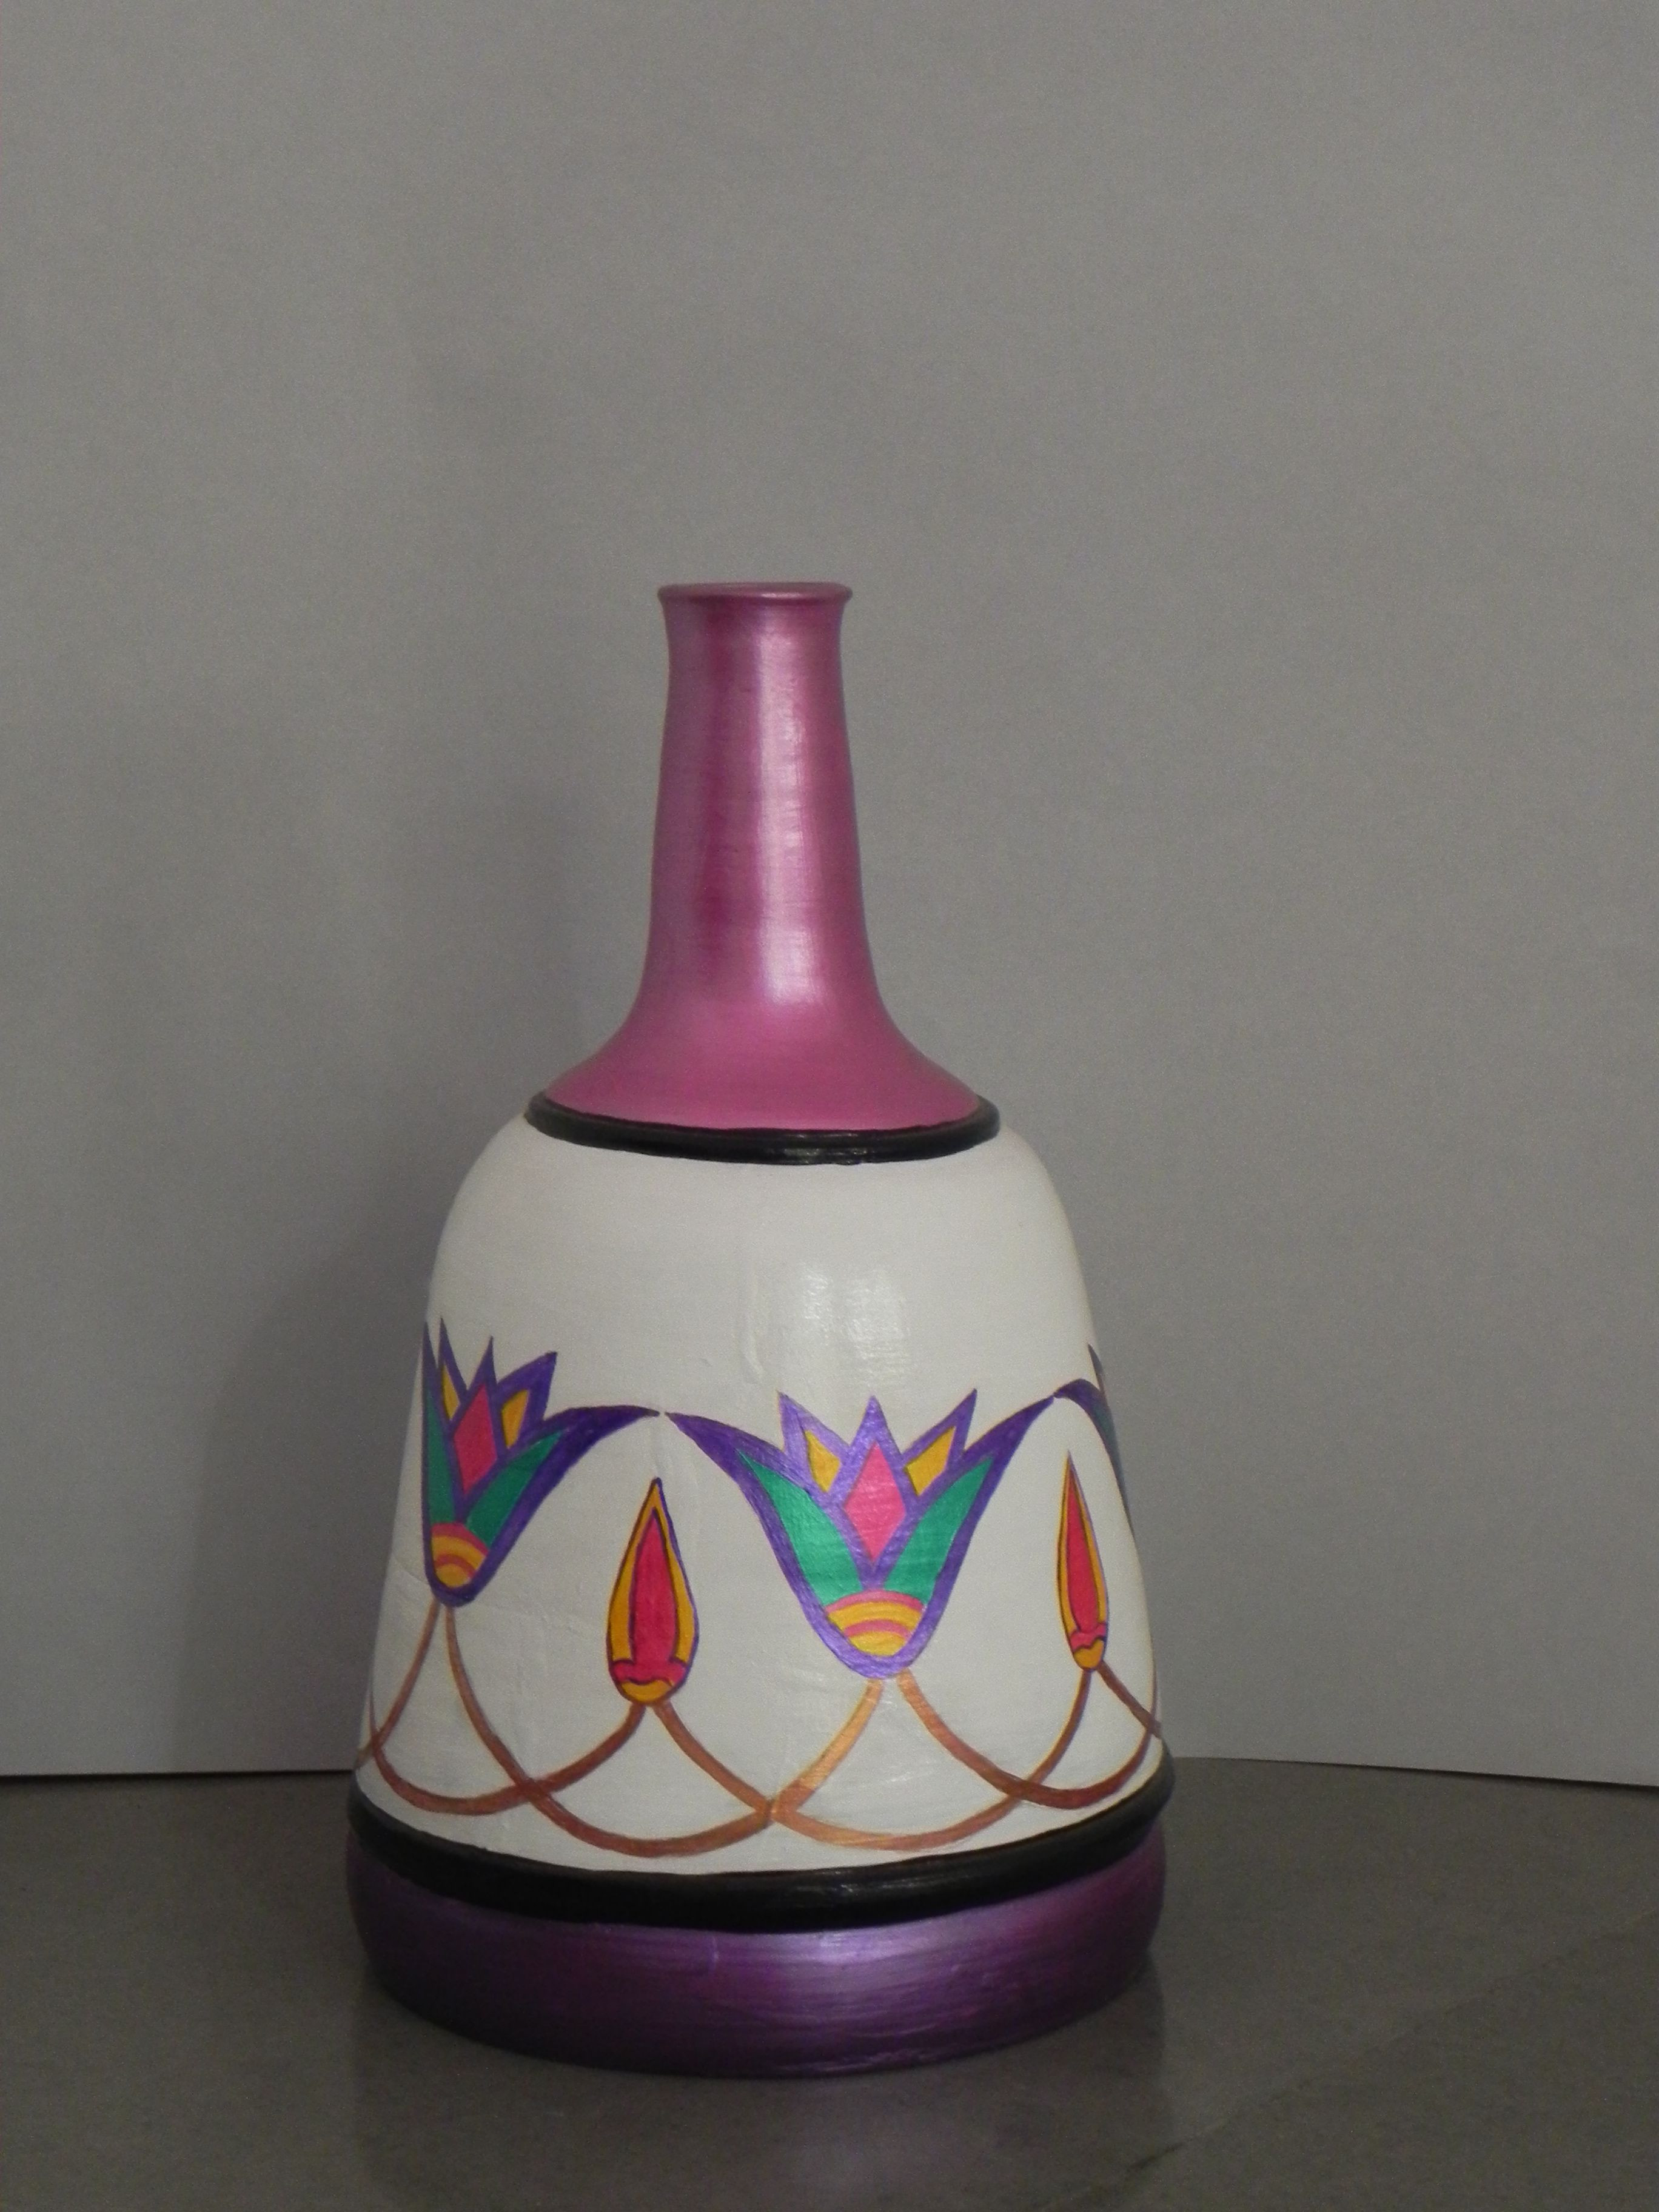 25 Recommended Large White Vases Online 2023 free download large white vases online of egyptian style pot floral design in egyptian style white background within egyptian style pot floral design in egyptian style white background pink neck violet bo